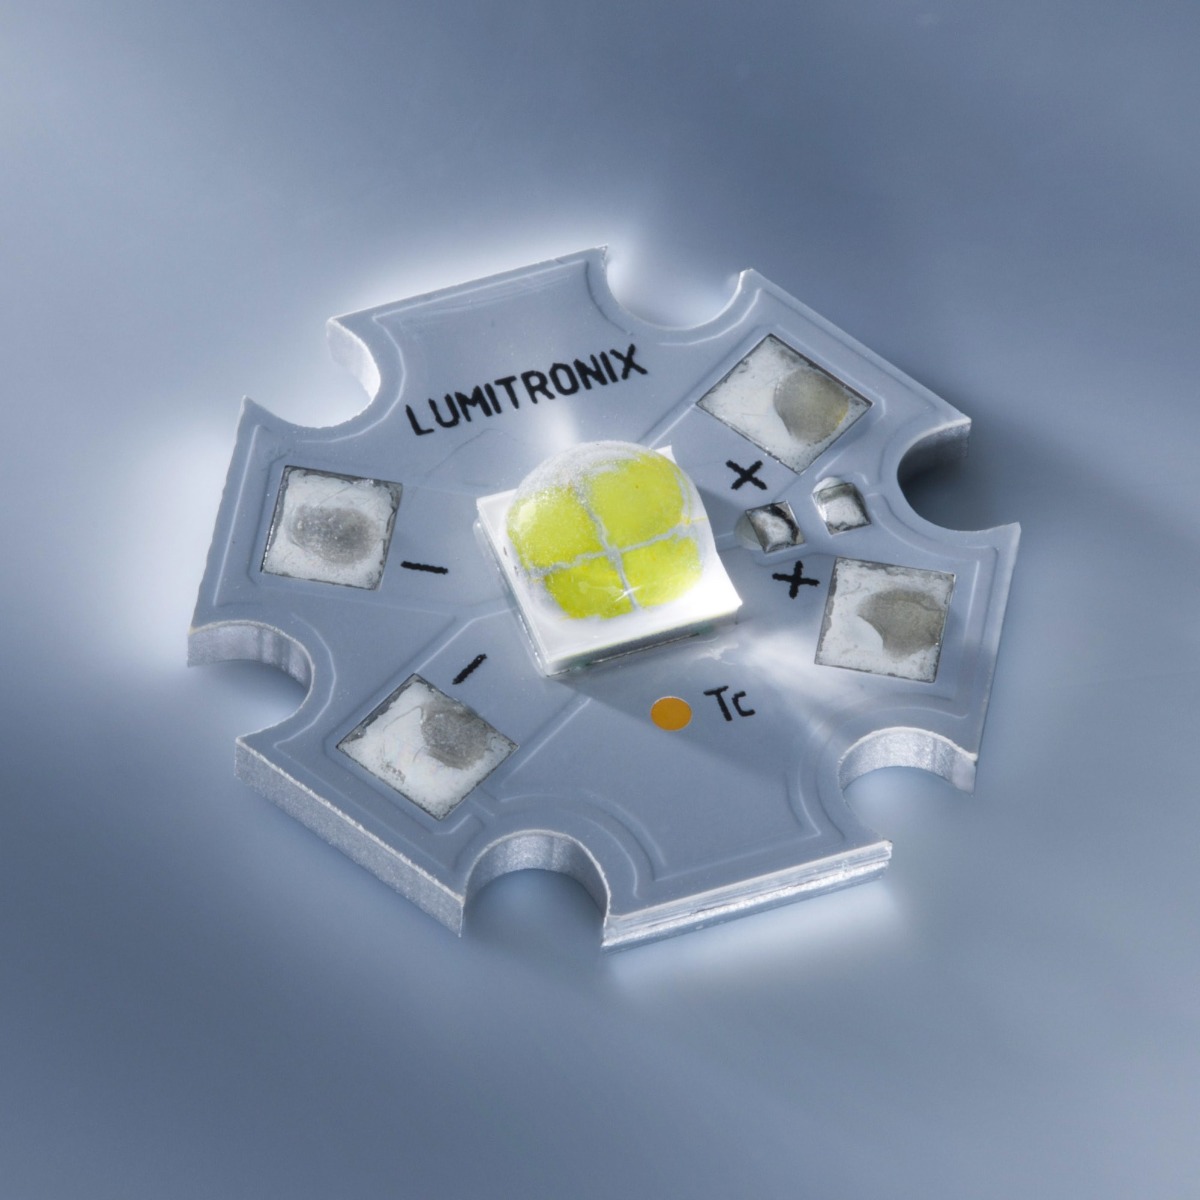 Cree XHP50 LED warmwhite 2700K 840lm with PCB (Star)